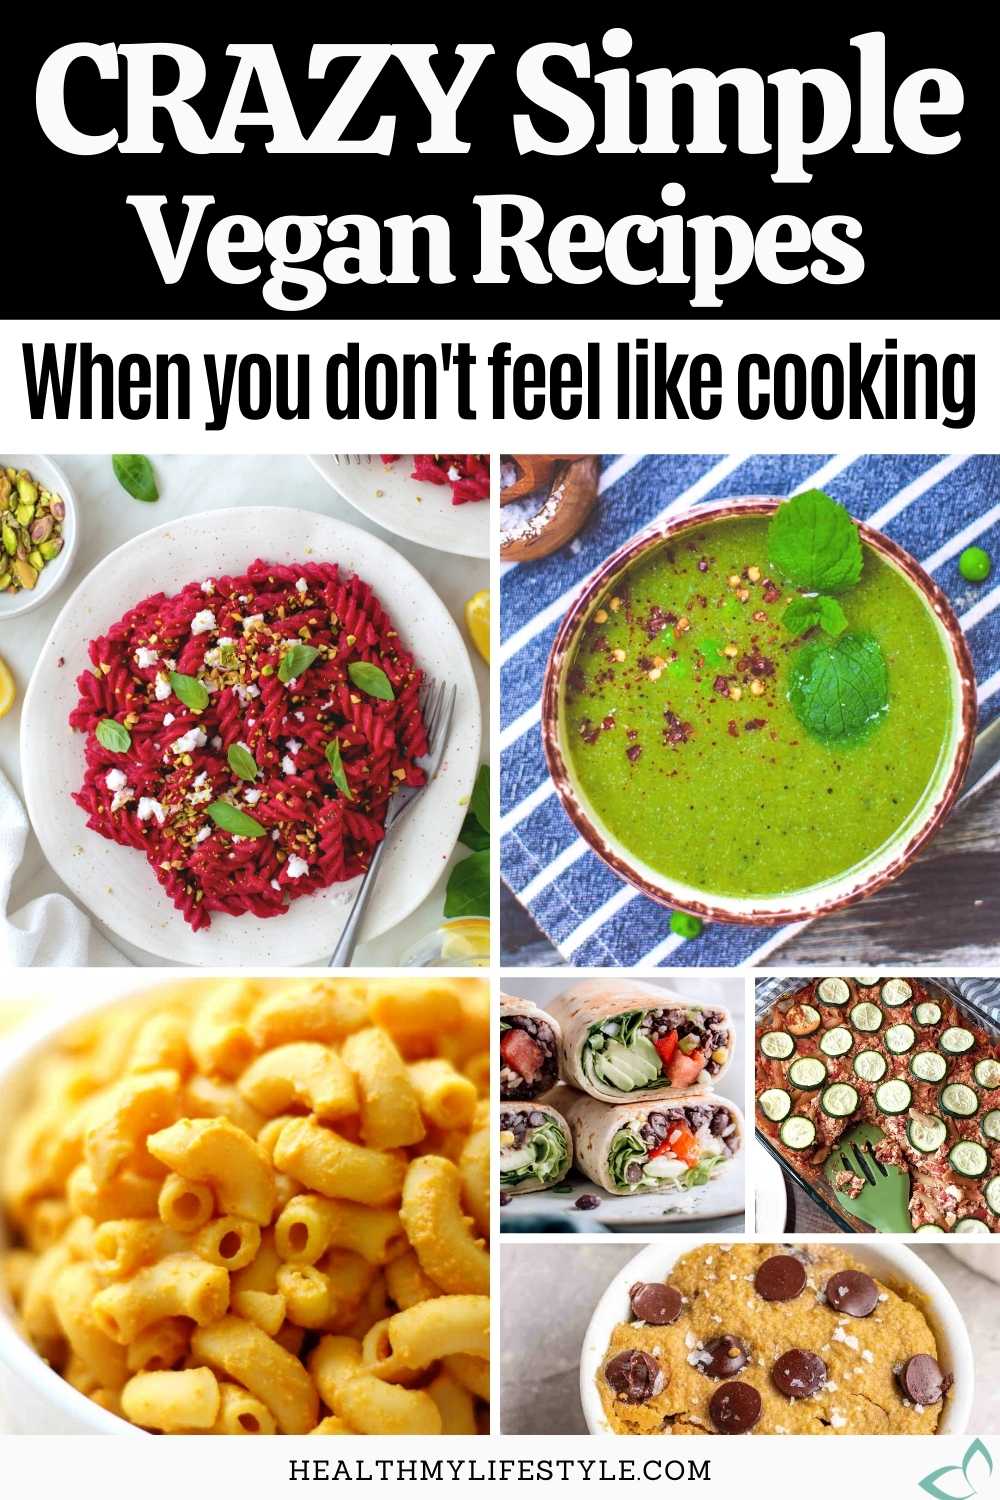 Collage of lazy vegan recipes with text overlay "Crazy simple vegan recipes when you don't feel like cooking."